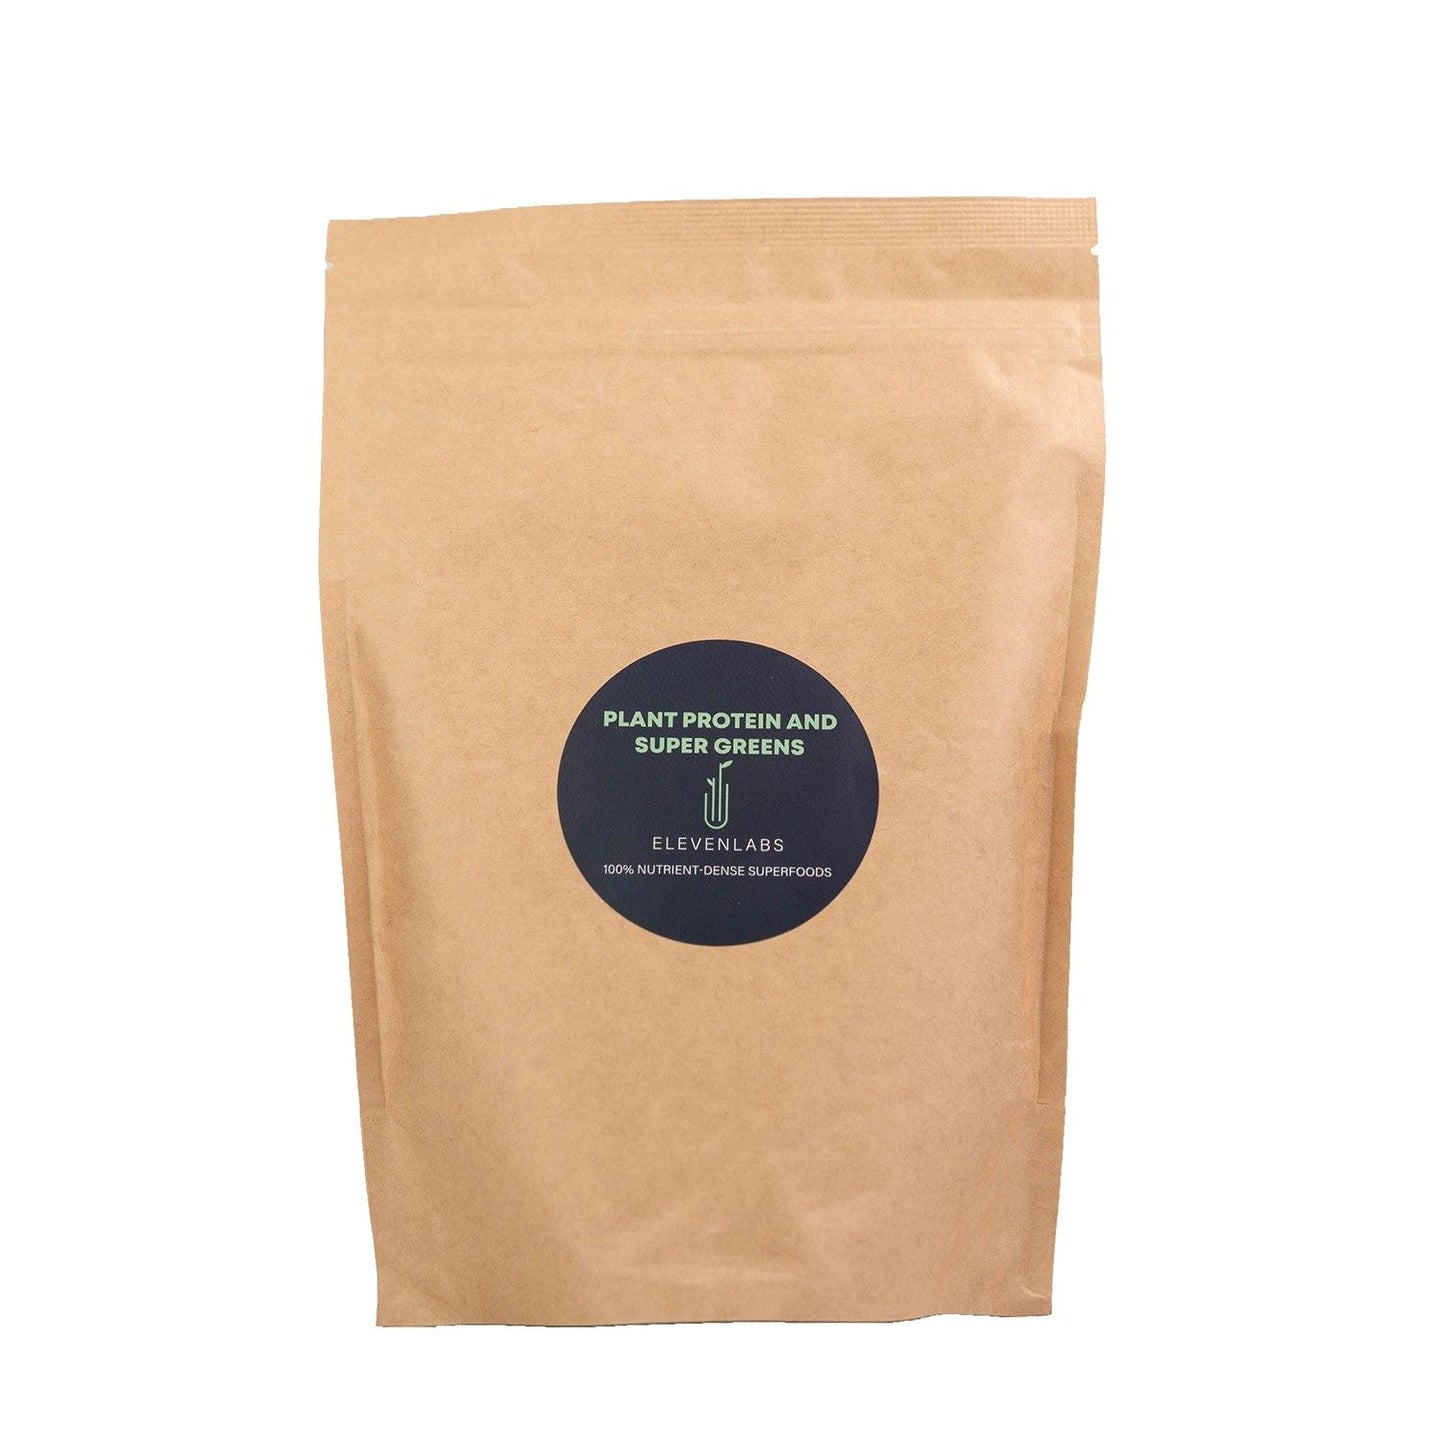 ElevenLabs Plant Protein and Super Greens Powder - 450G - ElevenLabs - 100% Organic Vegan Plant Protein